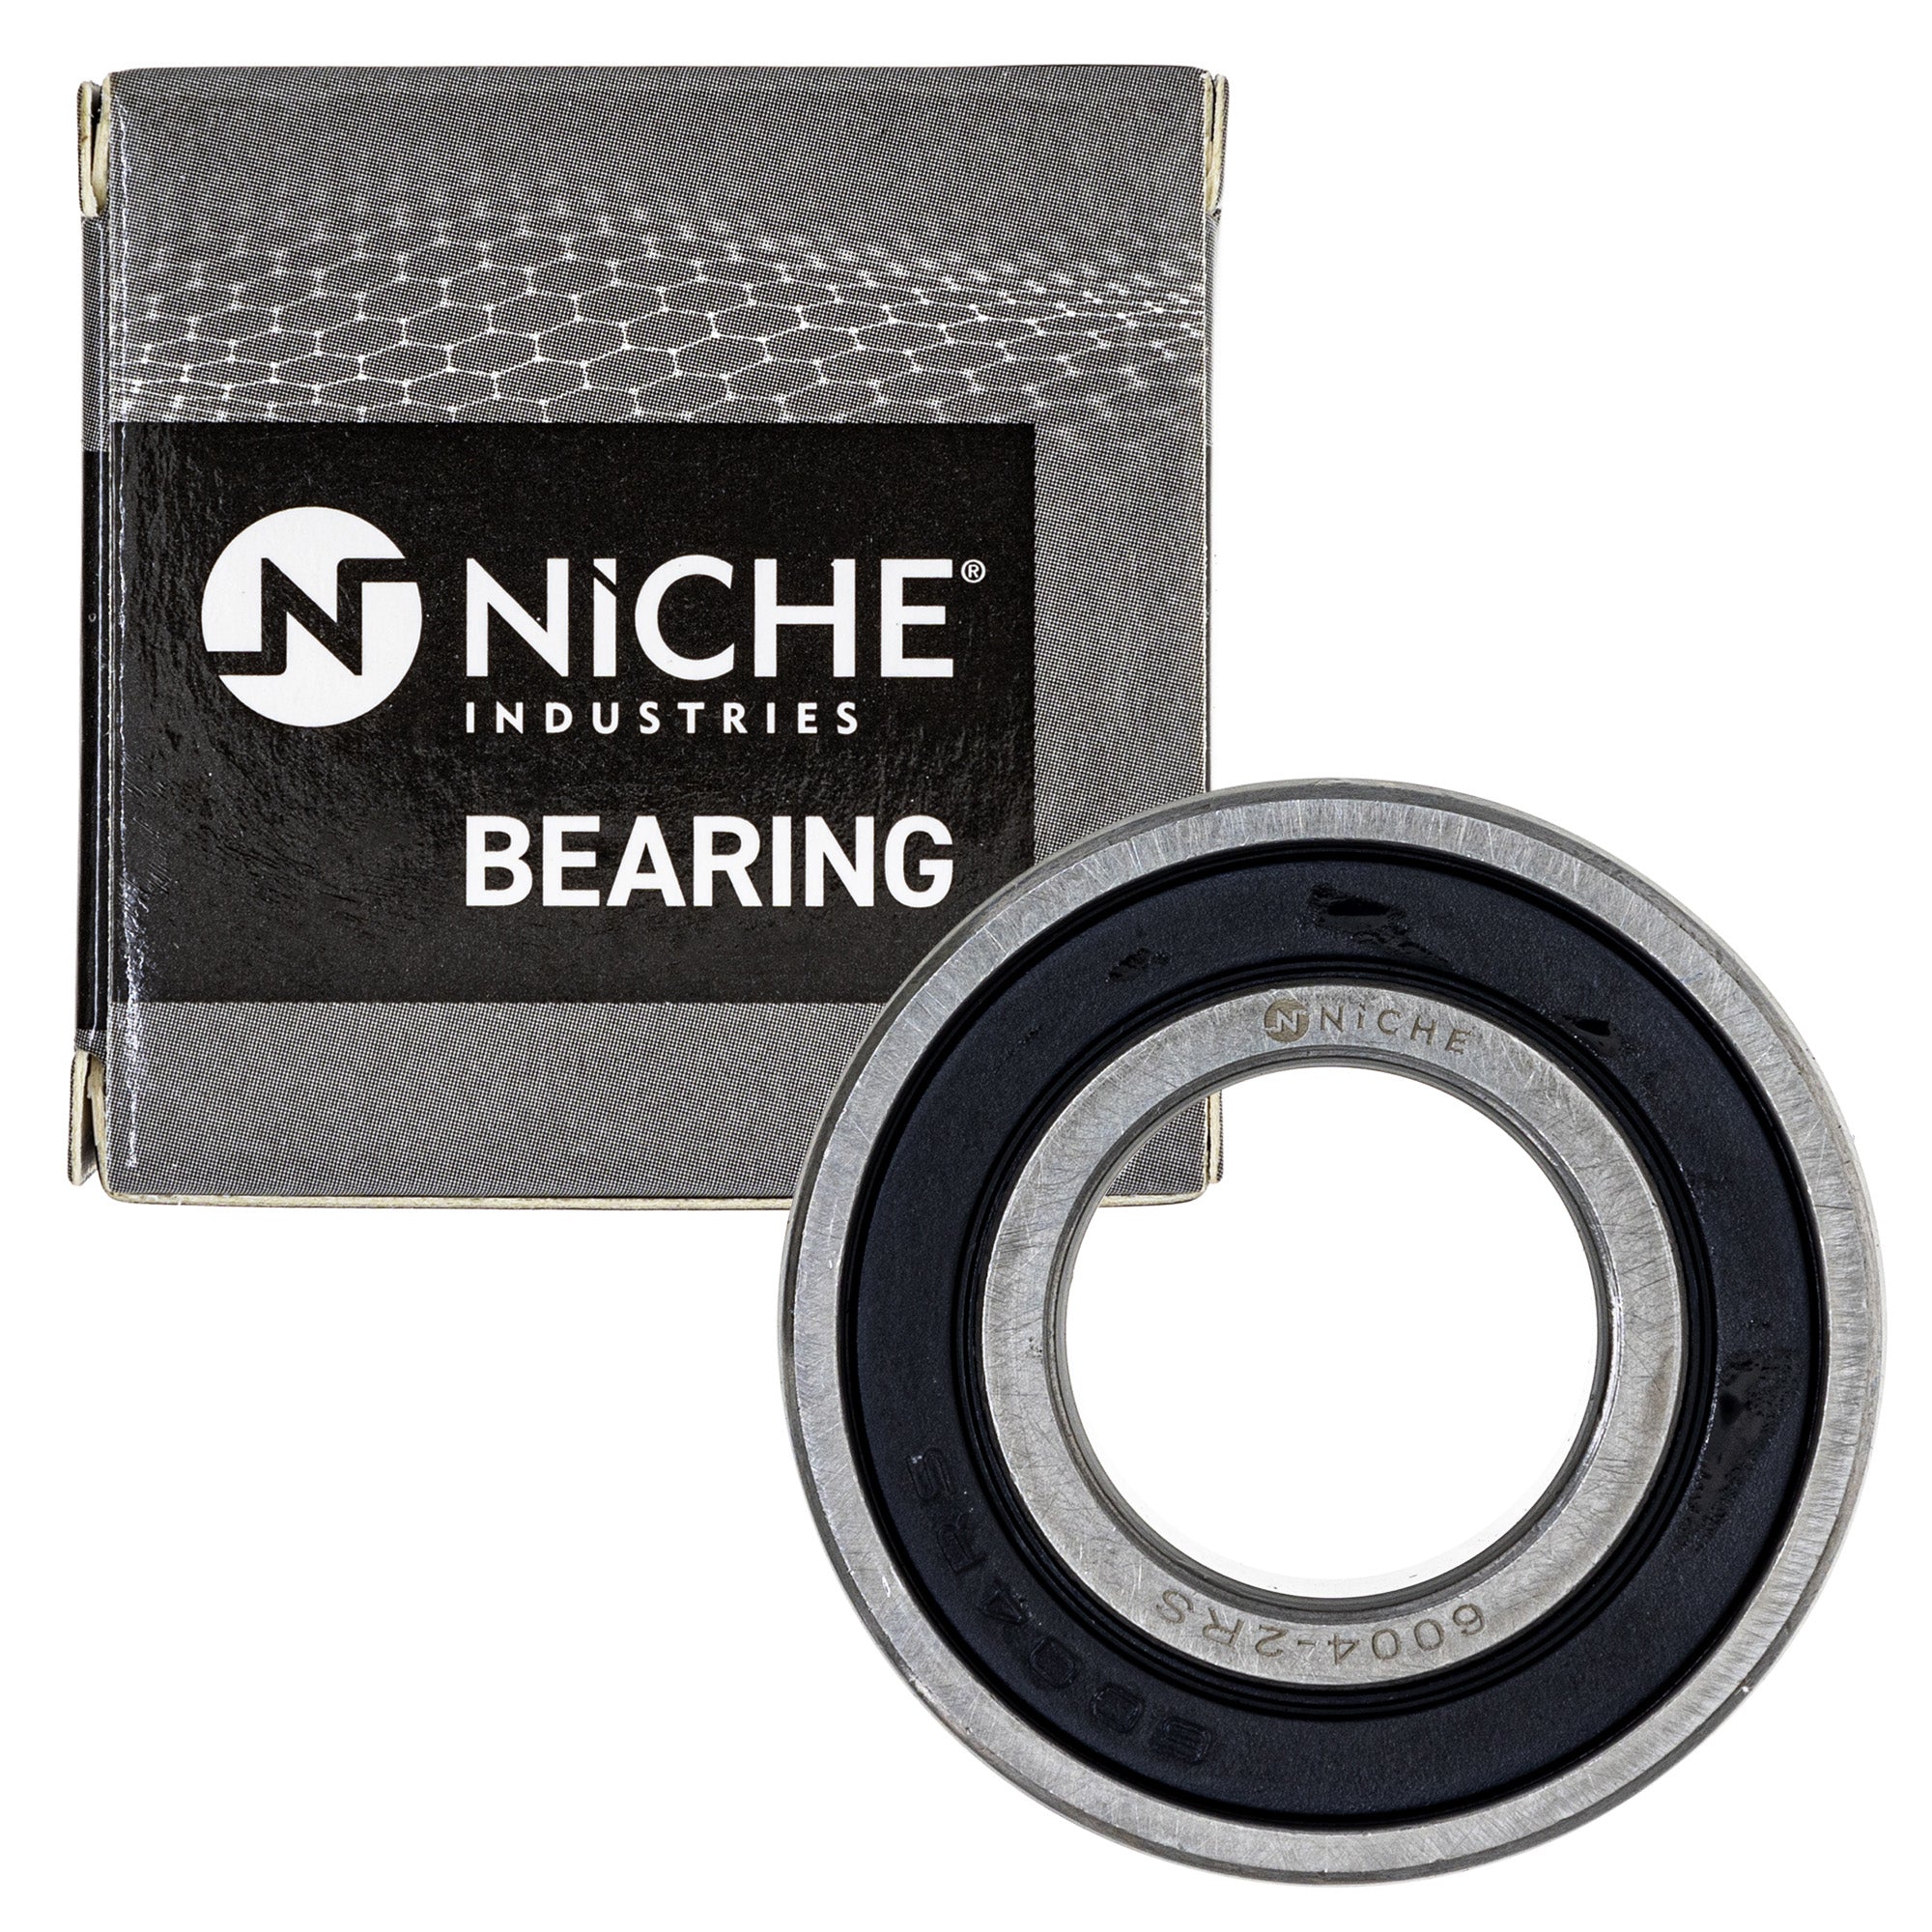 NICHE MK1009127 Wheel Bearing Seal Kit for zOTHER Ref No ZZR600